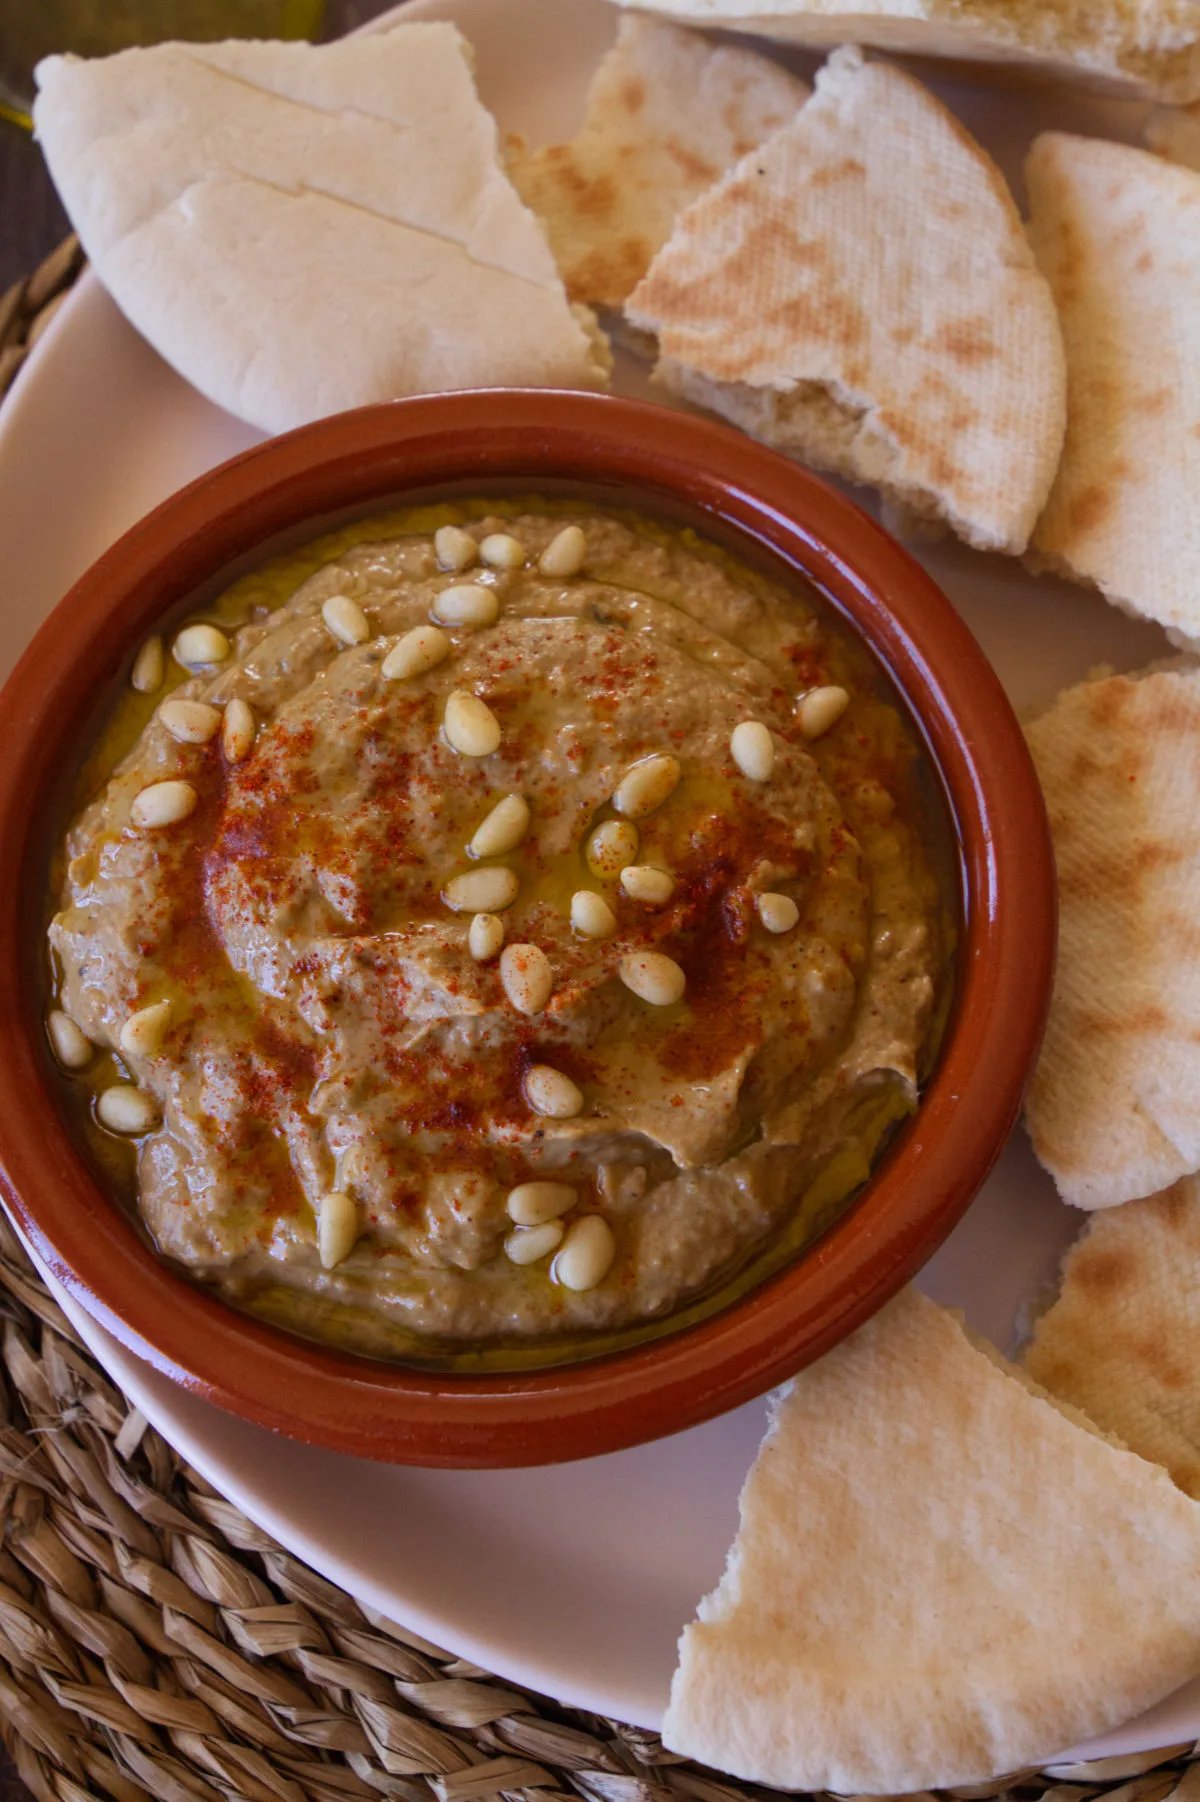 A small bowl of baba ganoush sits beside some pita bread.